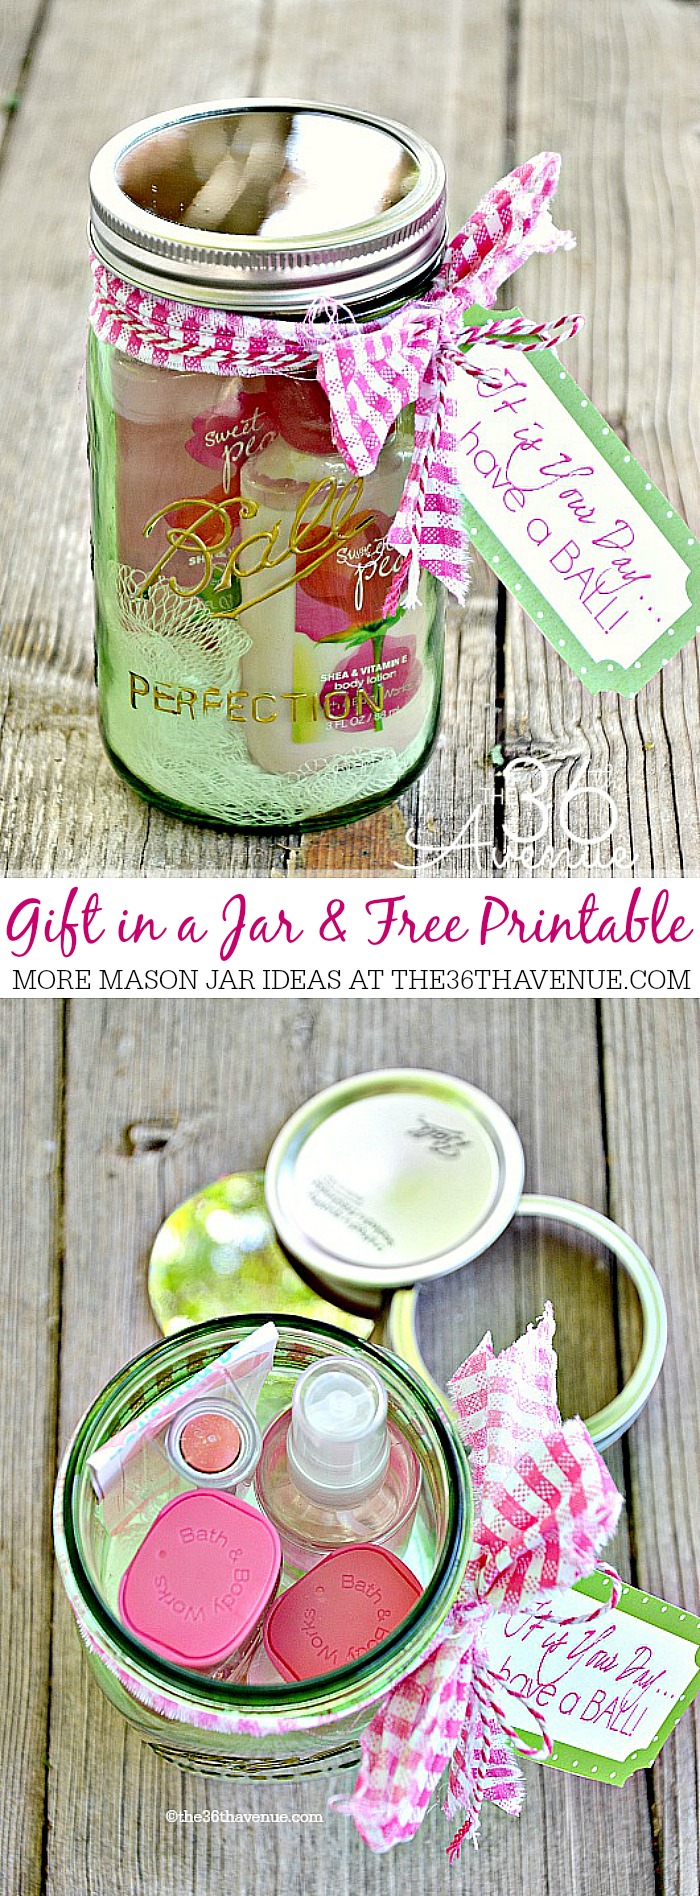 Gift in a Jar and Free Printable at the36thavenue.com